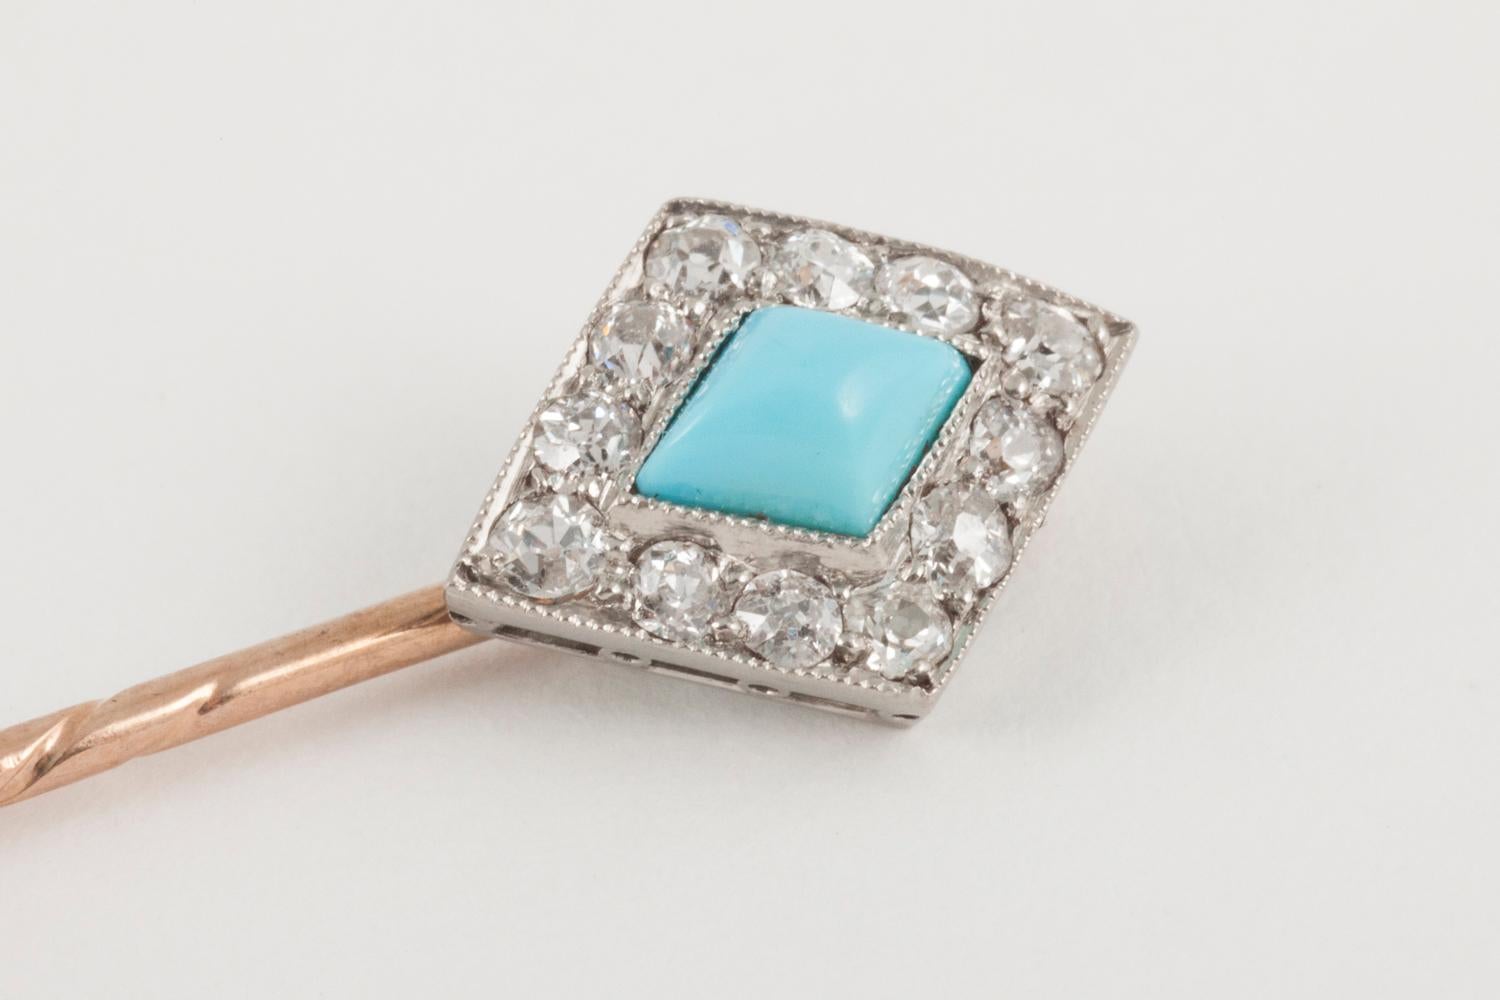 Late Victorian Diamond & Turquoise Tie or Lapel Pin in Platinum and Gold, English circa 1890 For Sale